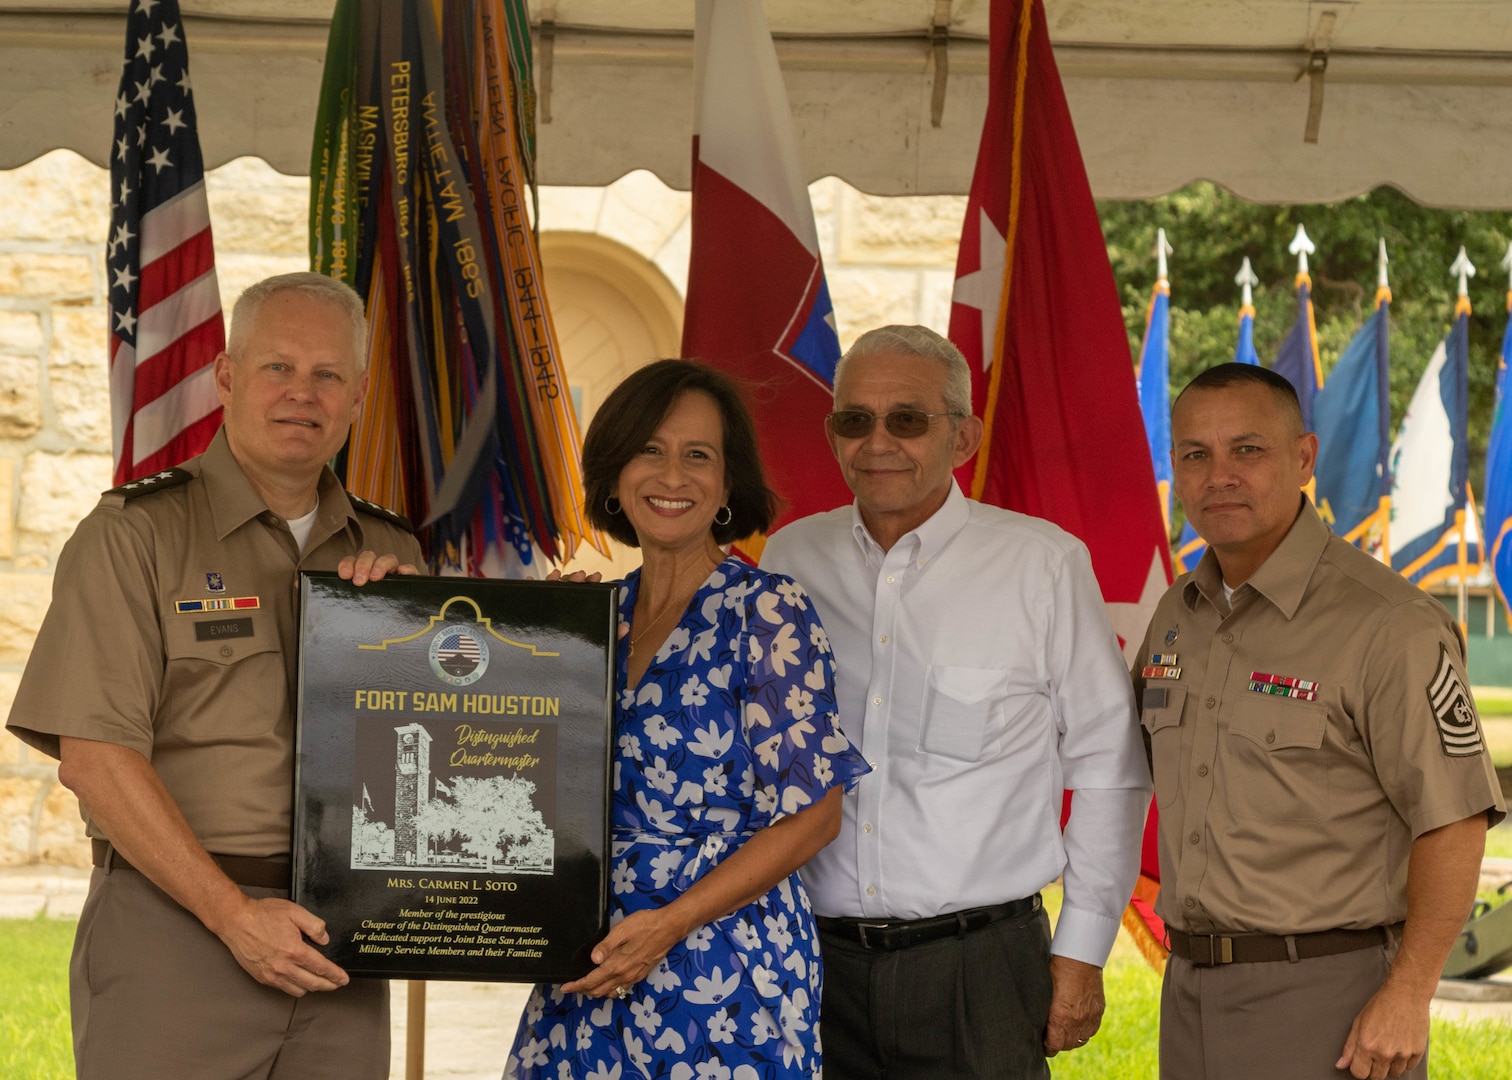 .S. Army Lt. Gen. John R. Evans, commanding general of Army North, and Command Sgt. Maj. Phil K. Barretto, senior enlisted advisor of Army North, presents Carmen L. Soto with a plaque inducting her into the Distinguished Quartermasters during the Army’s 247th birthday celebration, held at Joint Base San Antonio-Fort Sam Houston, Texas, June 14, 2022. Distinguished Quartermasters greatly reflect exceptional contribution to the Army mission through their tireless support to military programs and the San Antonio community. The Army’s annual birthday celebration highlights total force history and tradition, and commemorates the continuous commitment to defending America 24/7. (U.S. Army Photo by Spc. Andrea Kent)